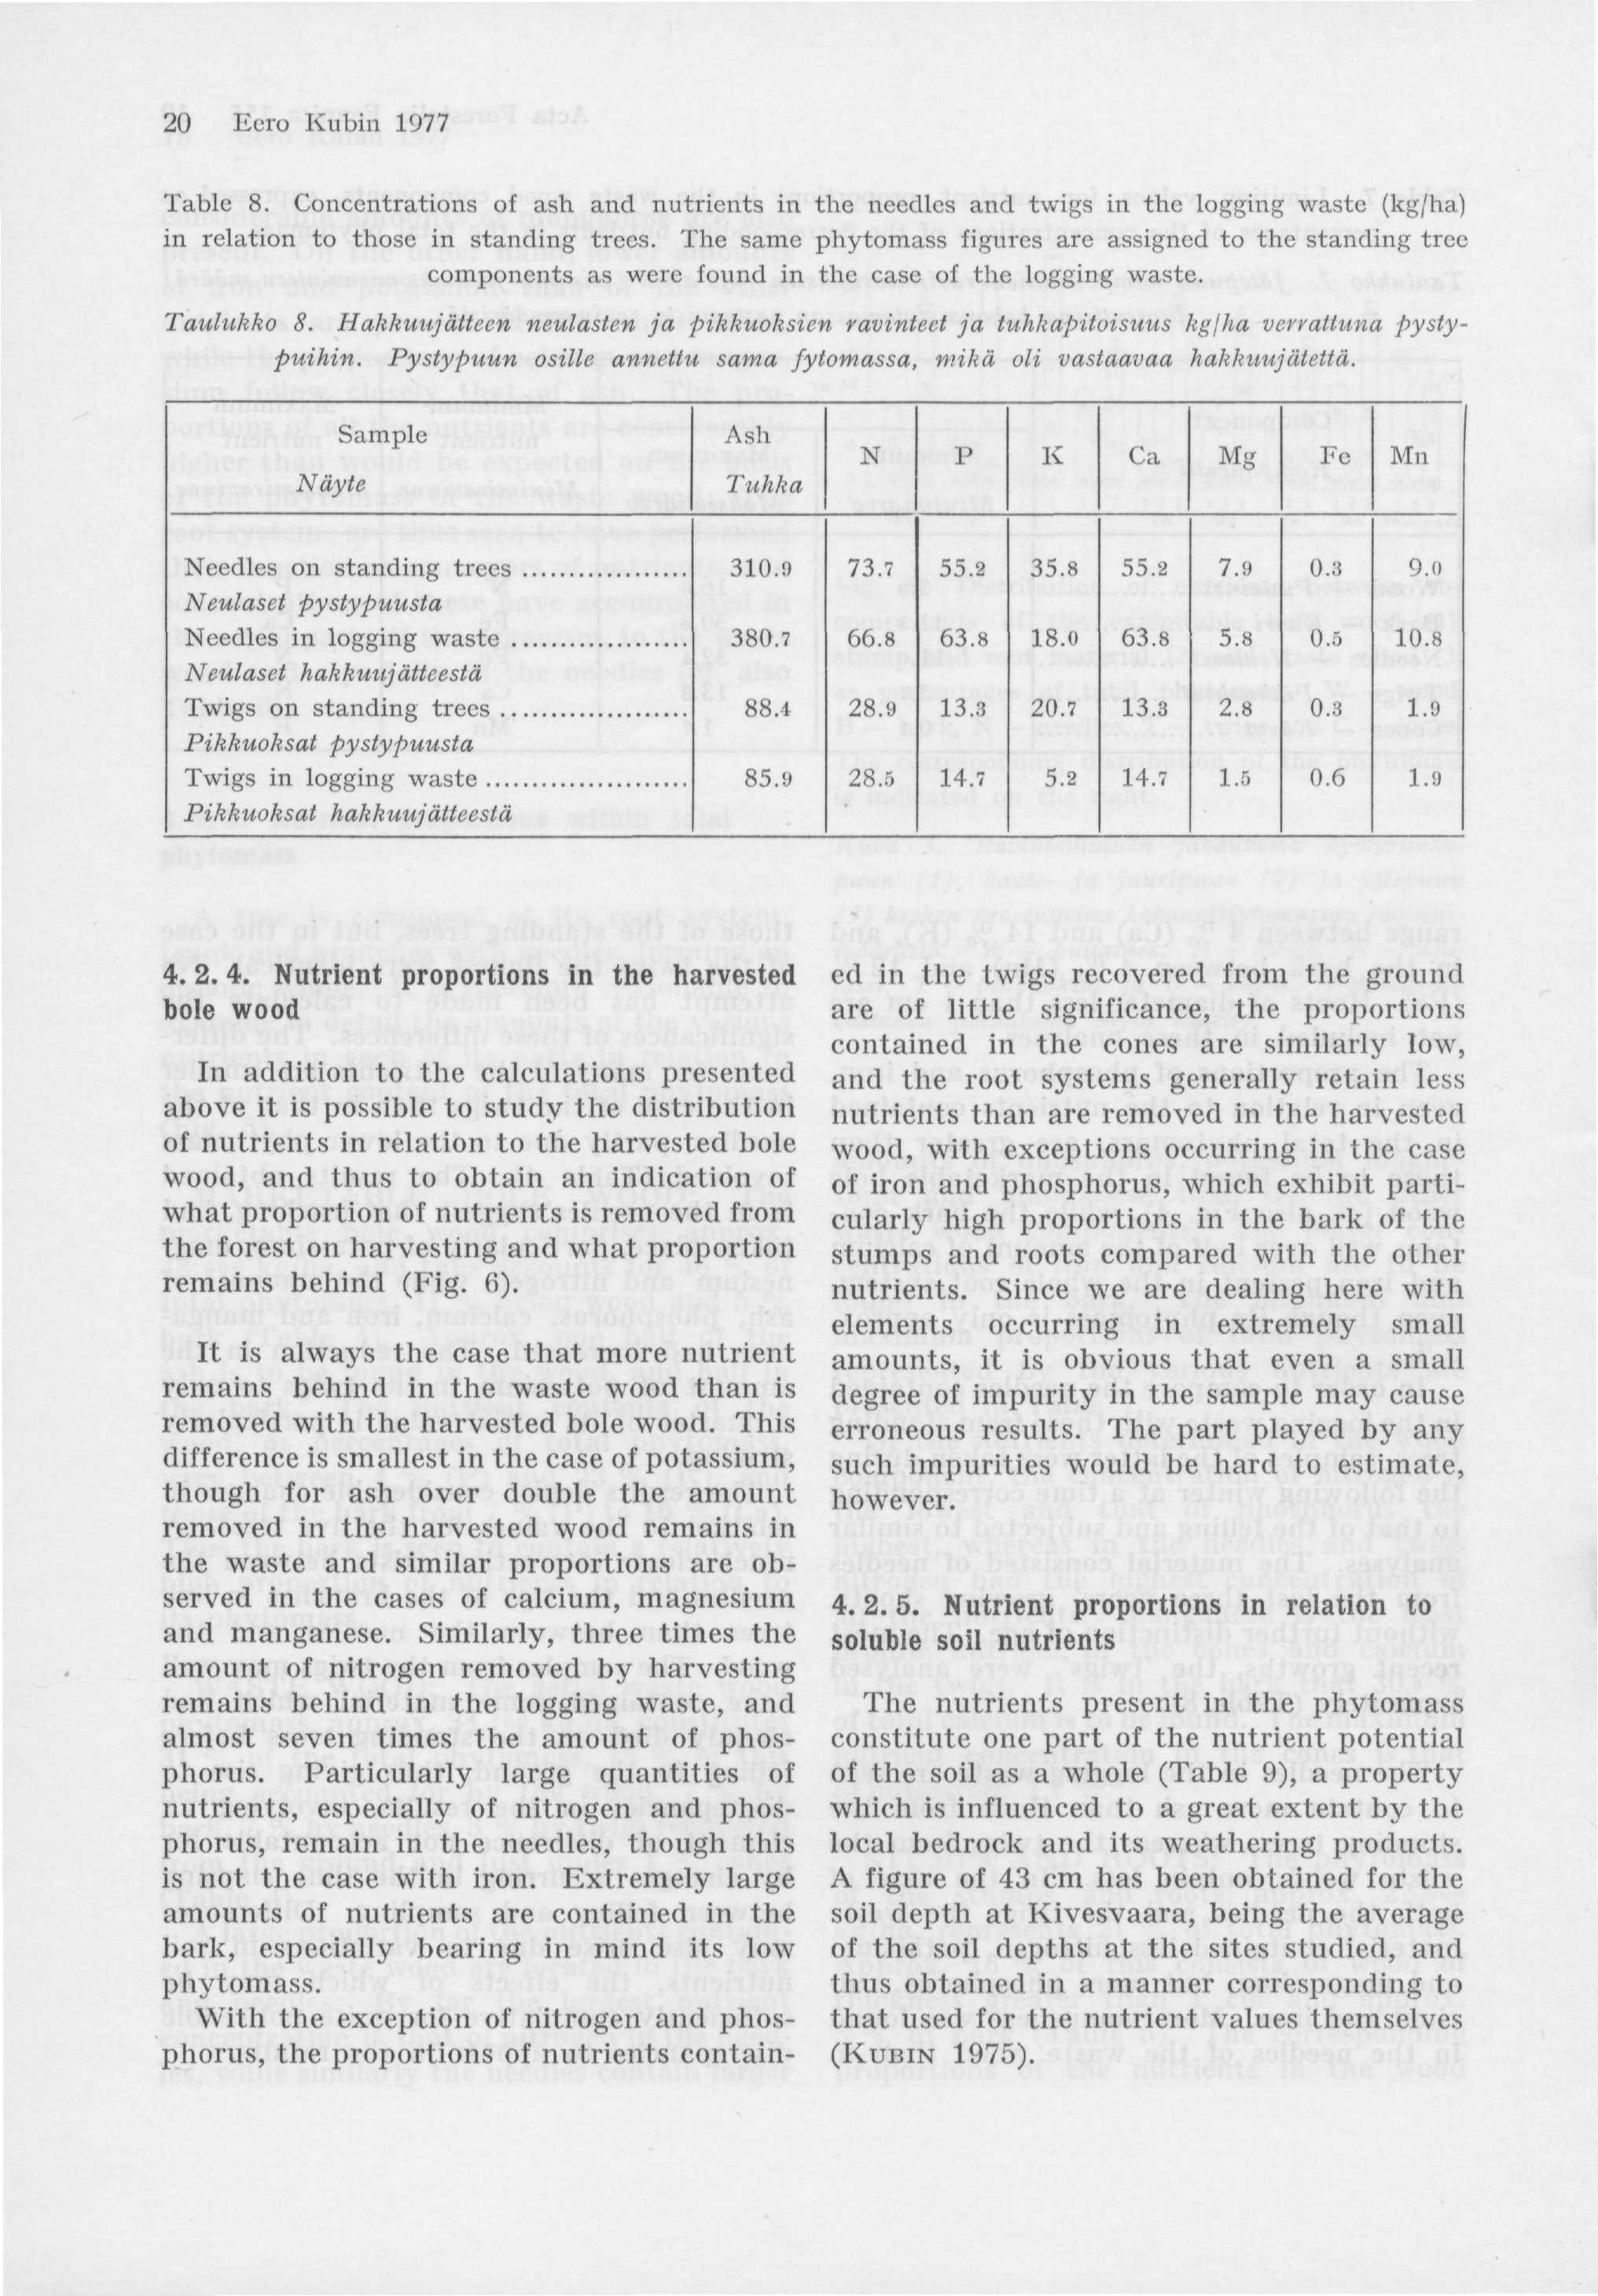 20 Eero Kubin 1977 Table 8. Concentrations of ash and nutrients in the needles and twigs in the logging waste (kg/ha) in relation to those in standing trees.